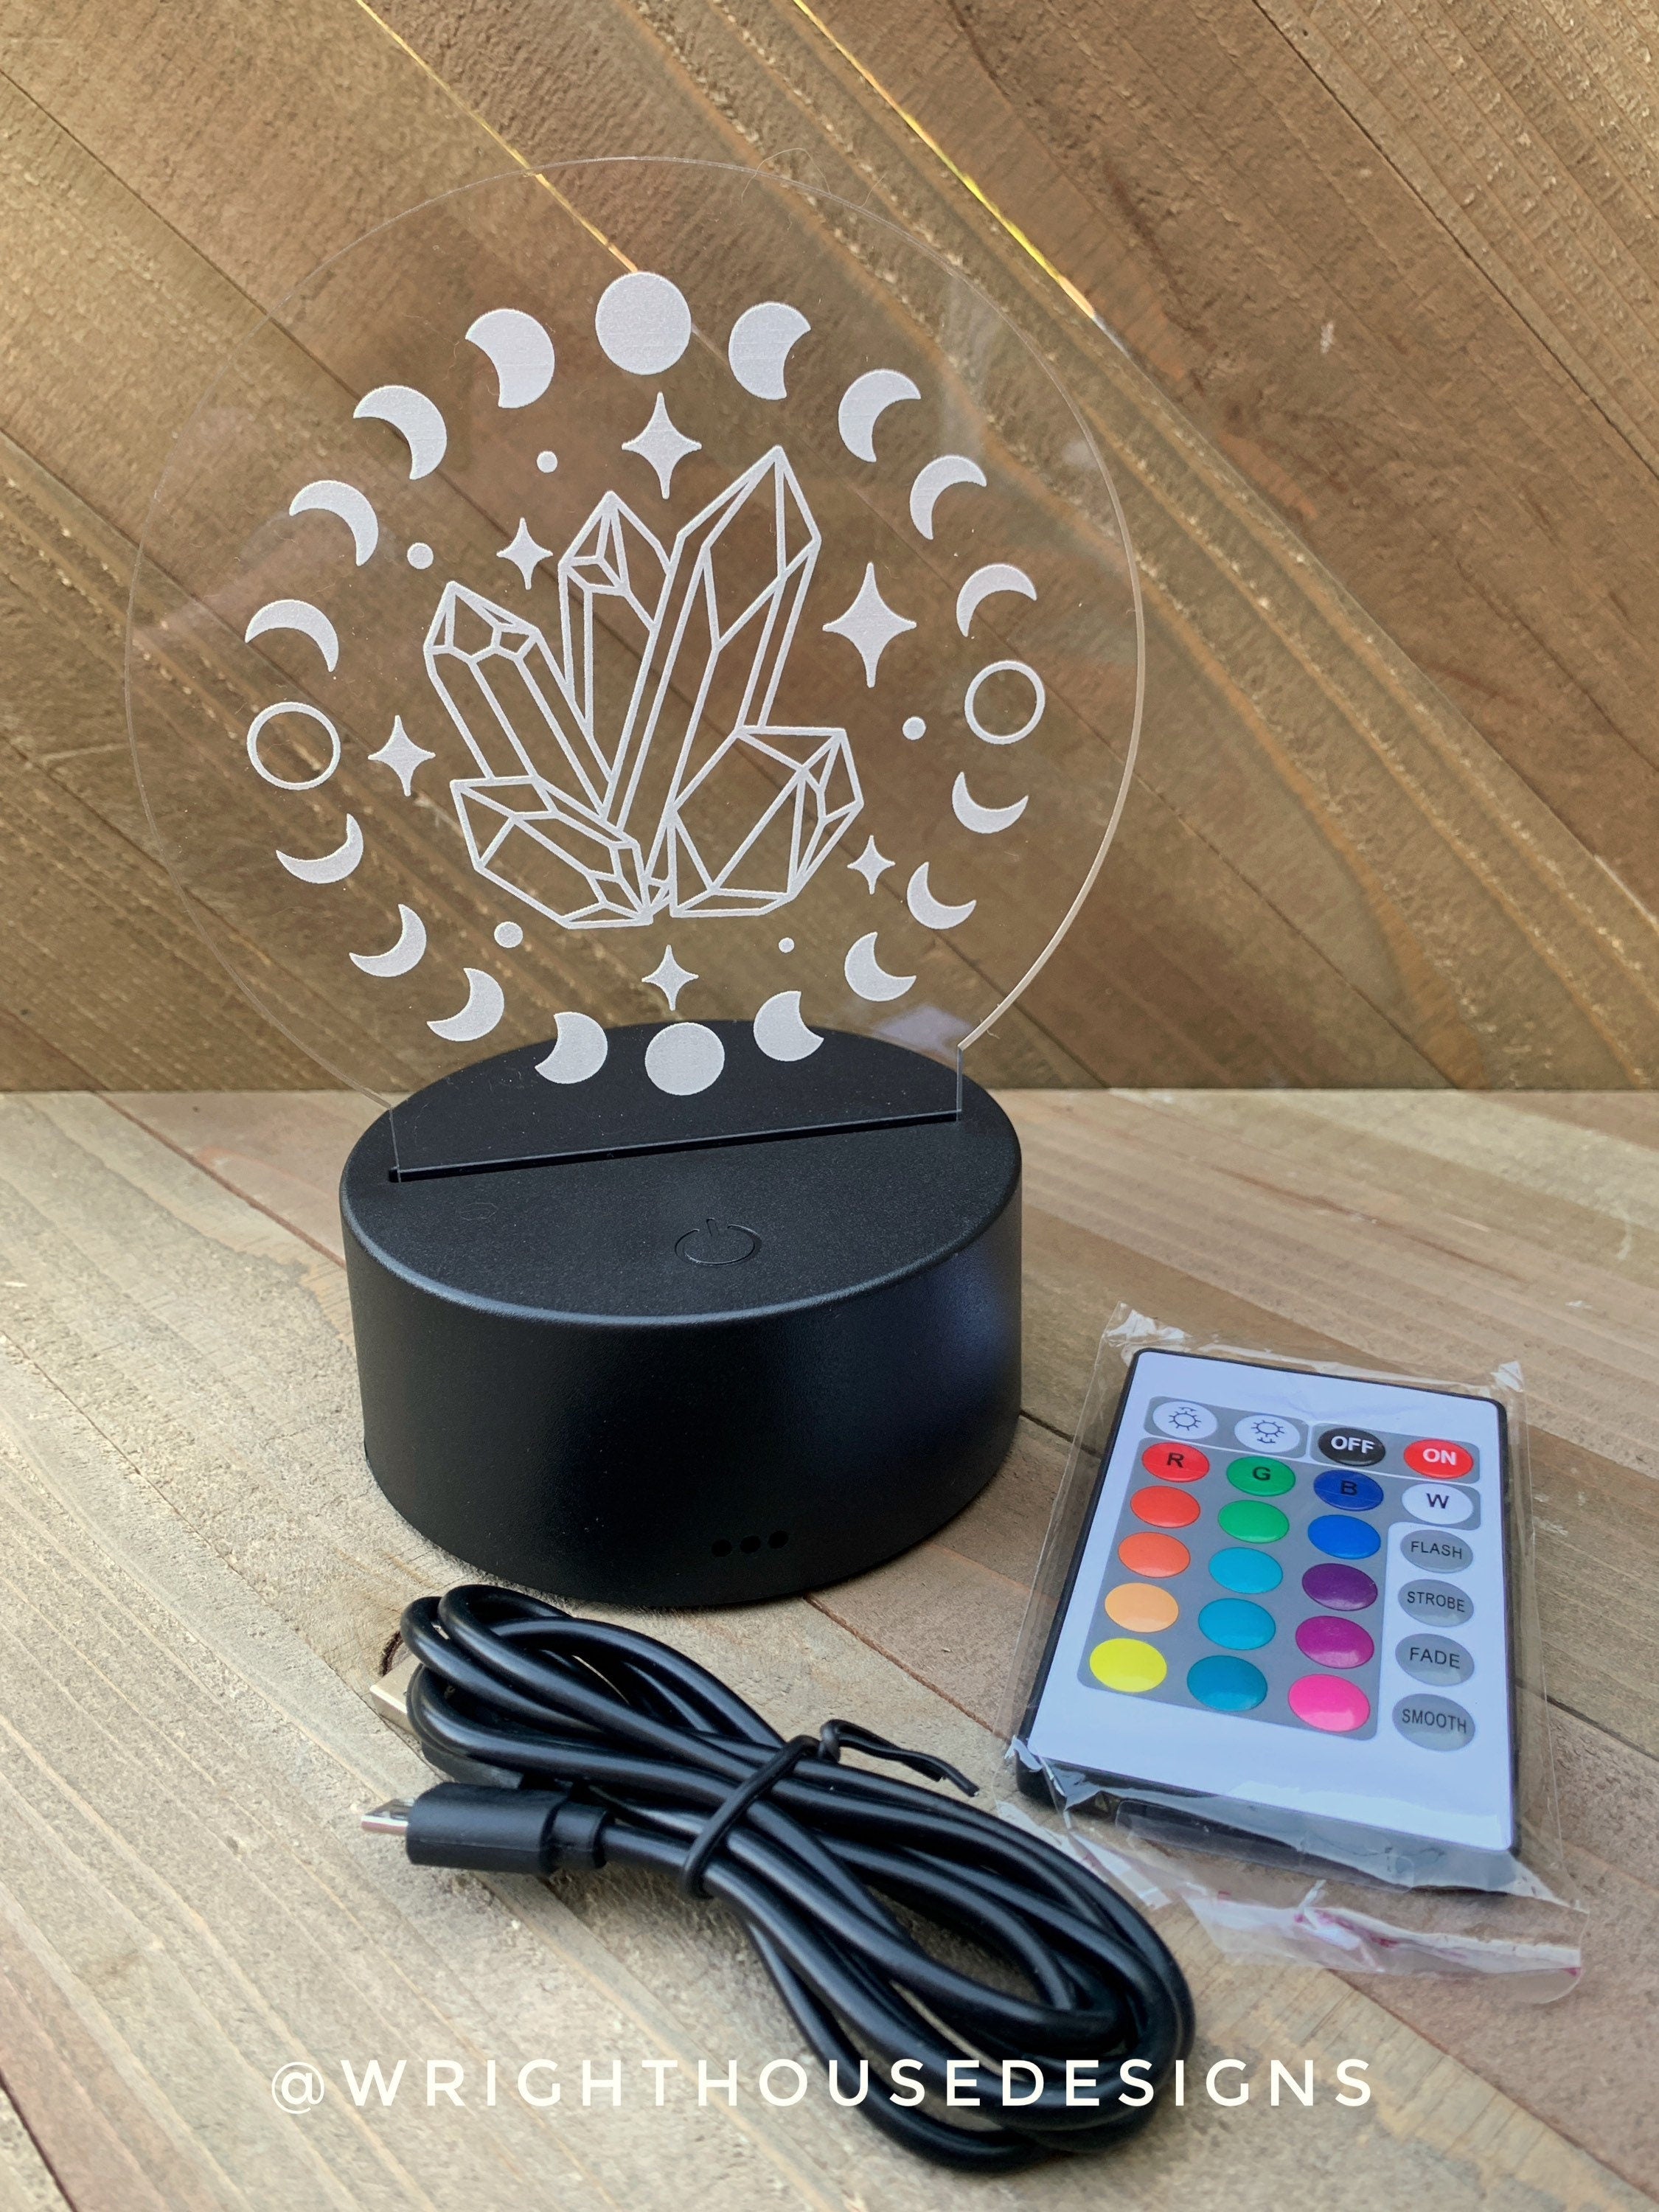 Engraved Acrylic LED Light Base - Moon Phase and Crystals - Witchy Decor - Desk Light - Interchangeable Nightlight